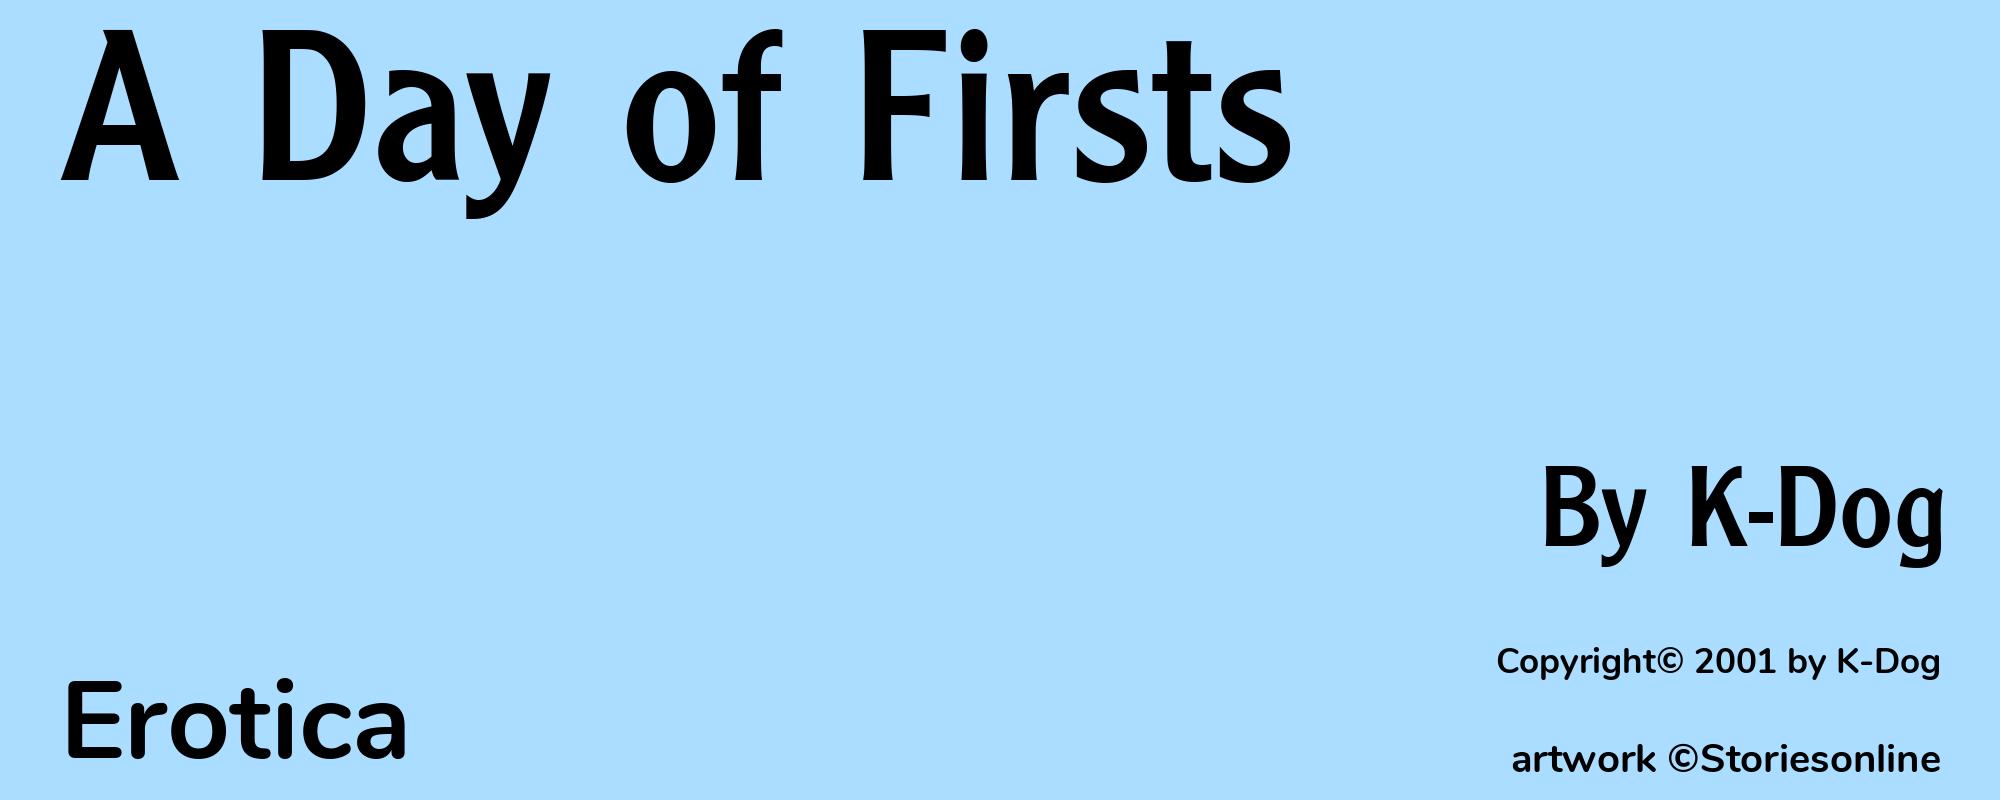 A Day of Firsts - Cover